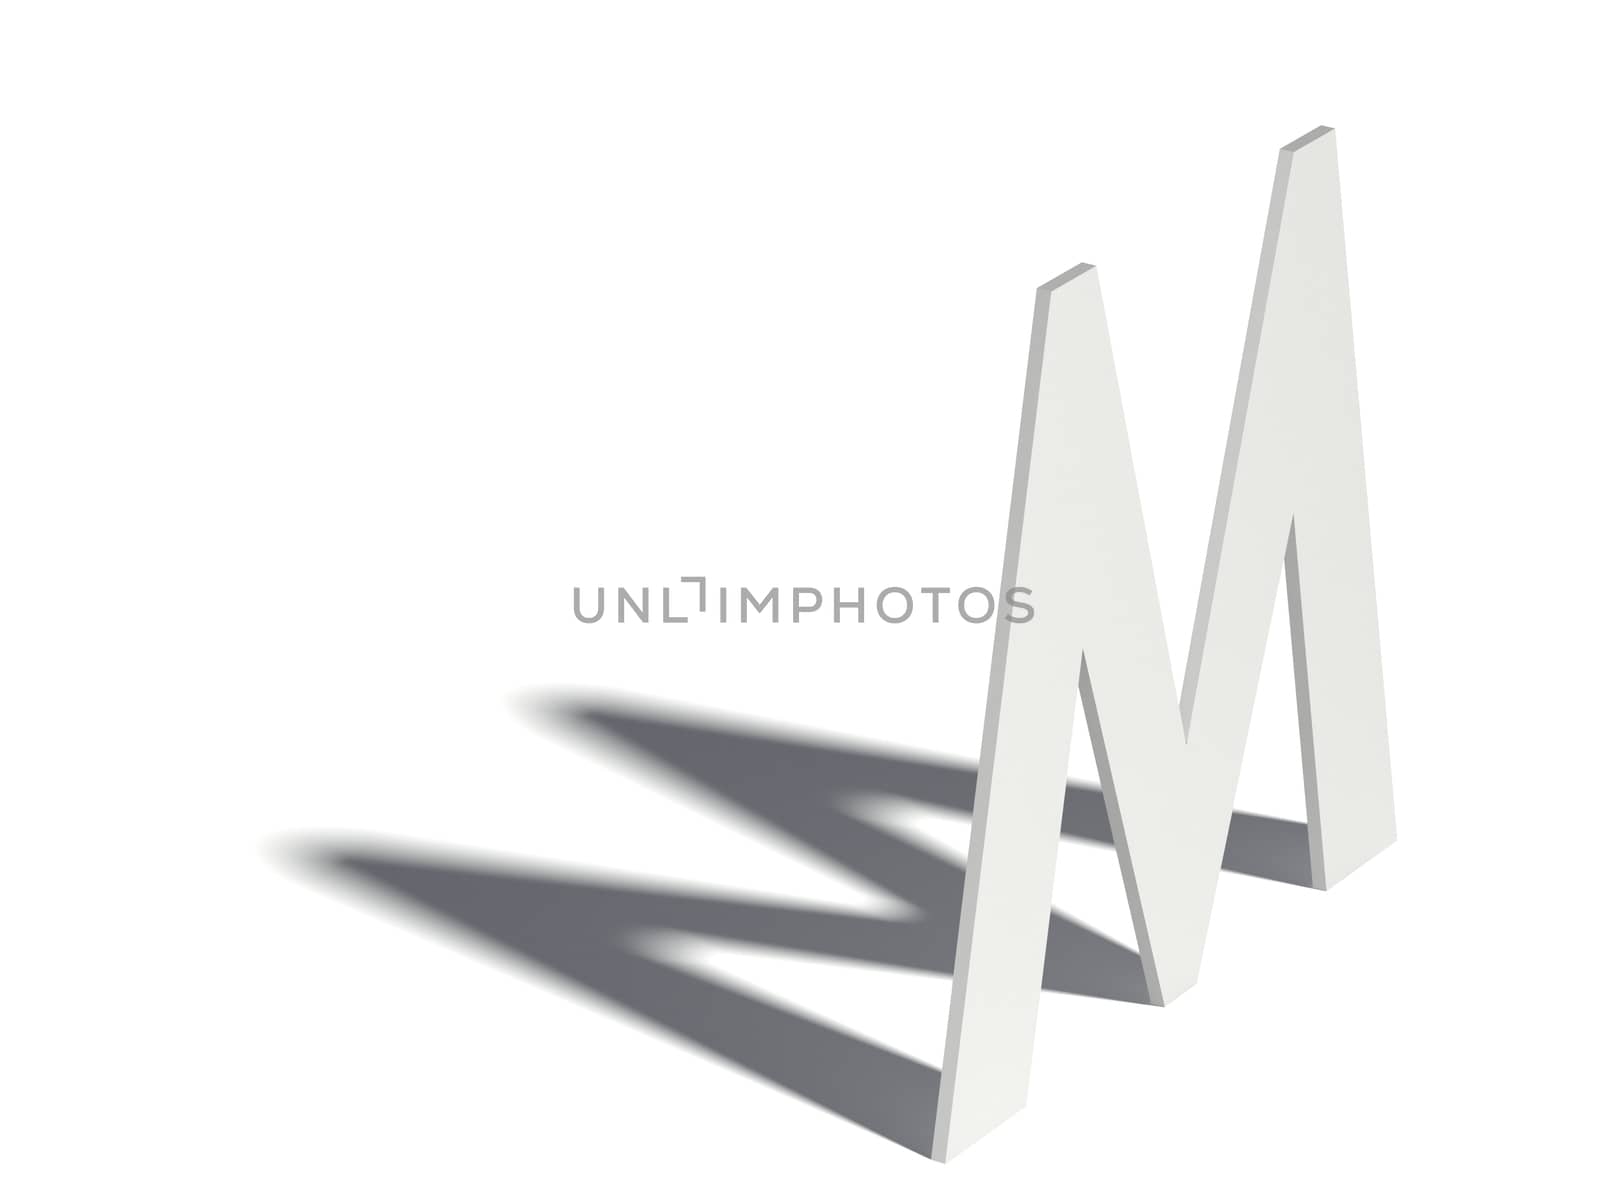 Drop shadow font. Letter M. 3D render illustration isolated on white background